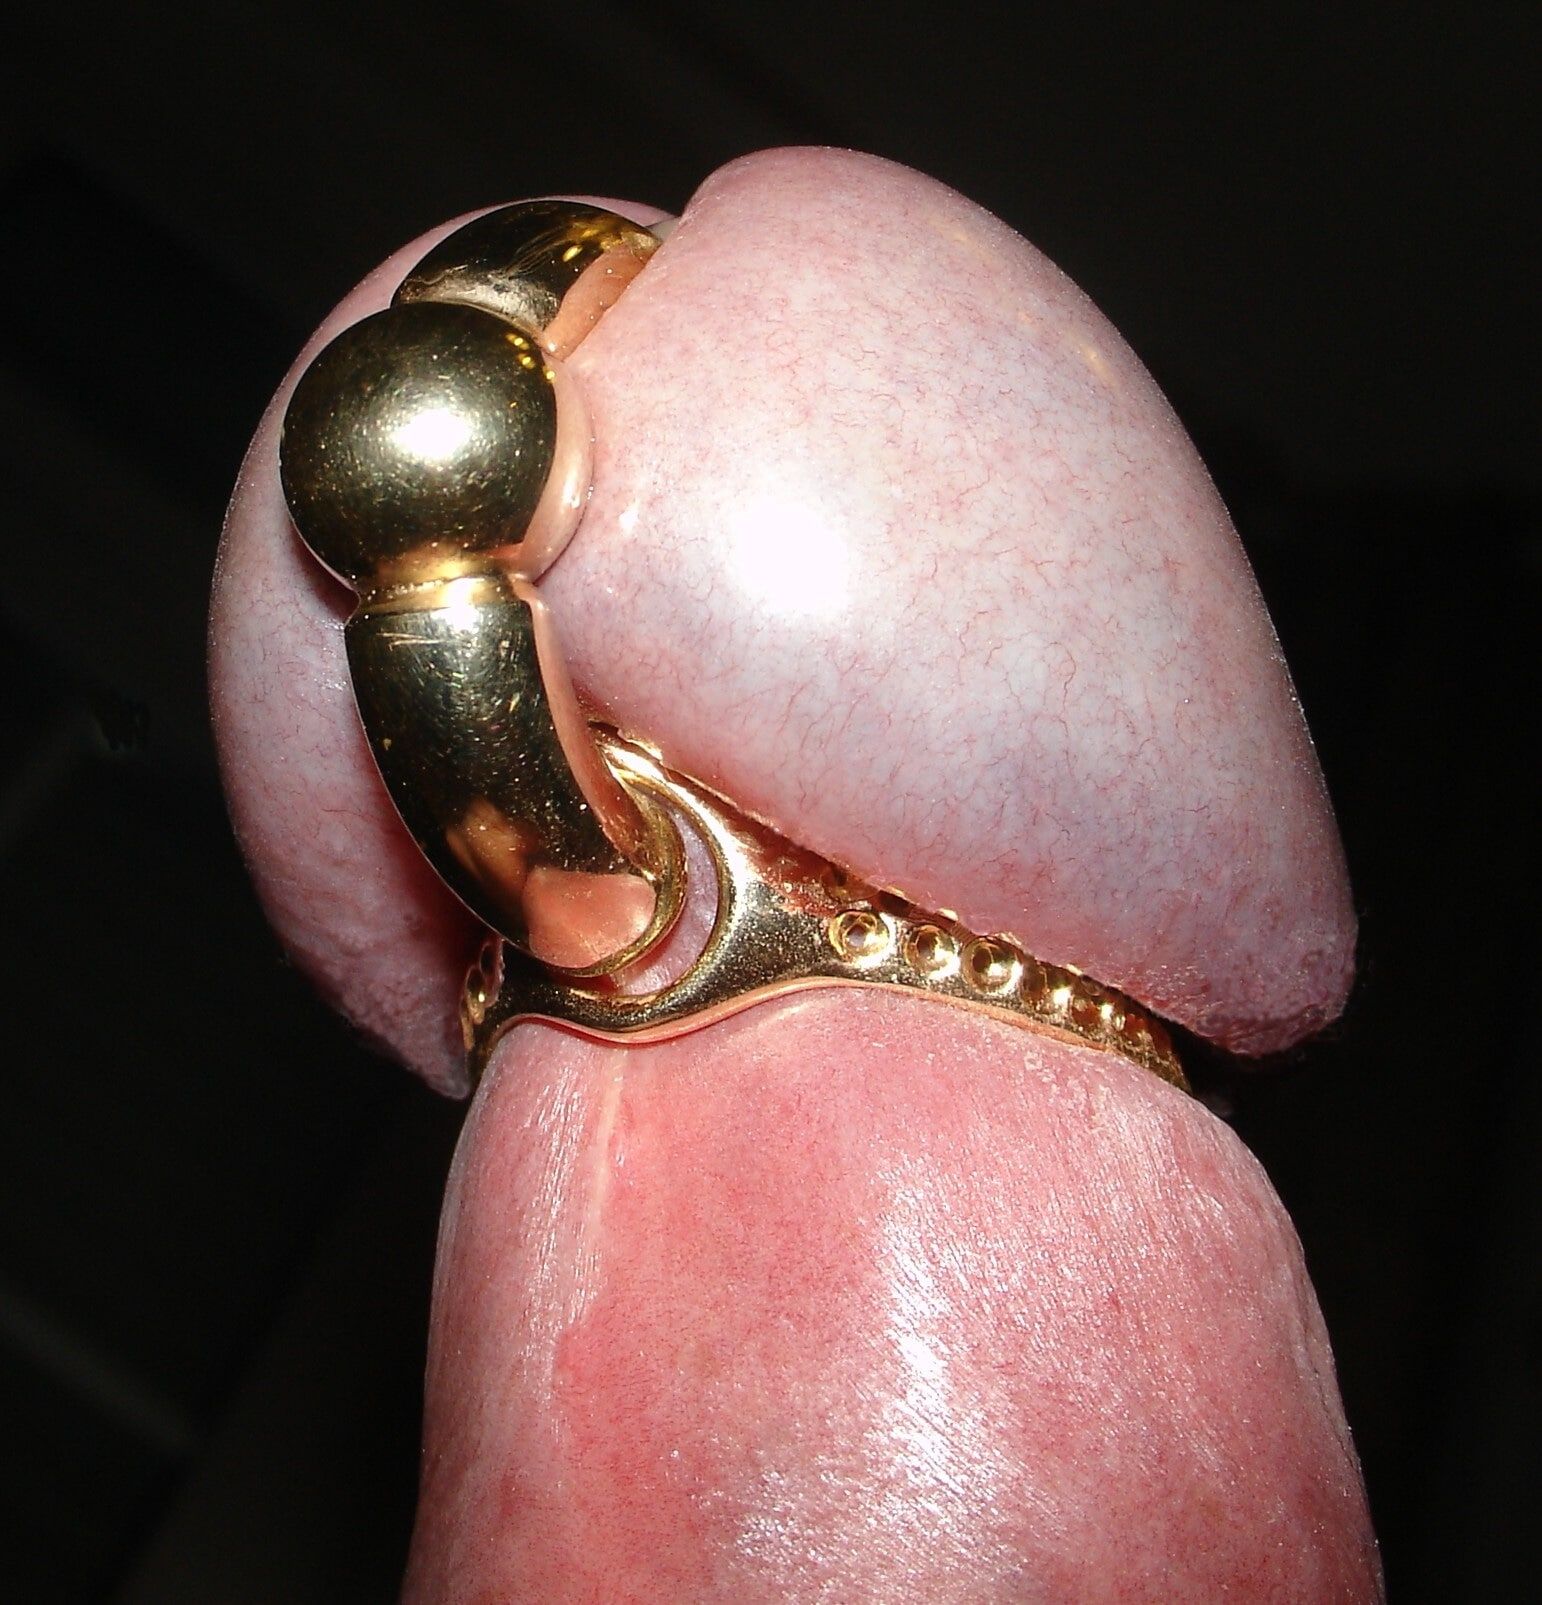 My cock with jewelry